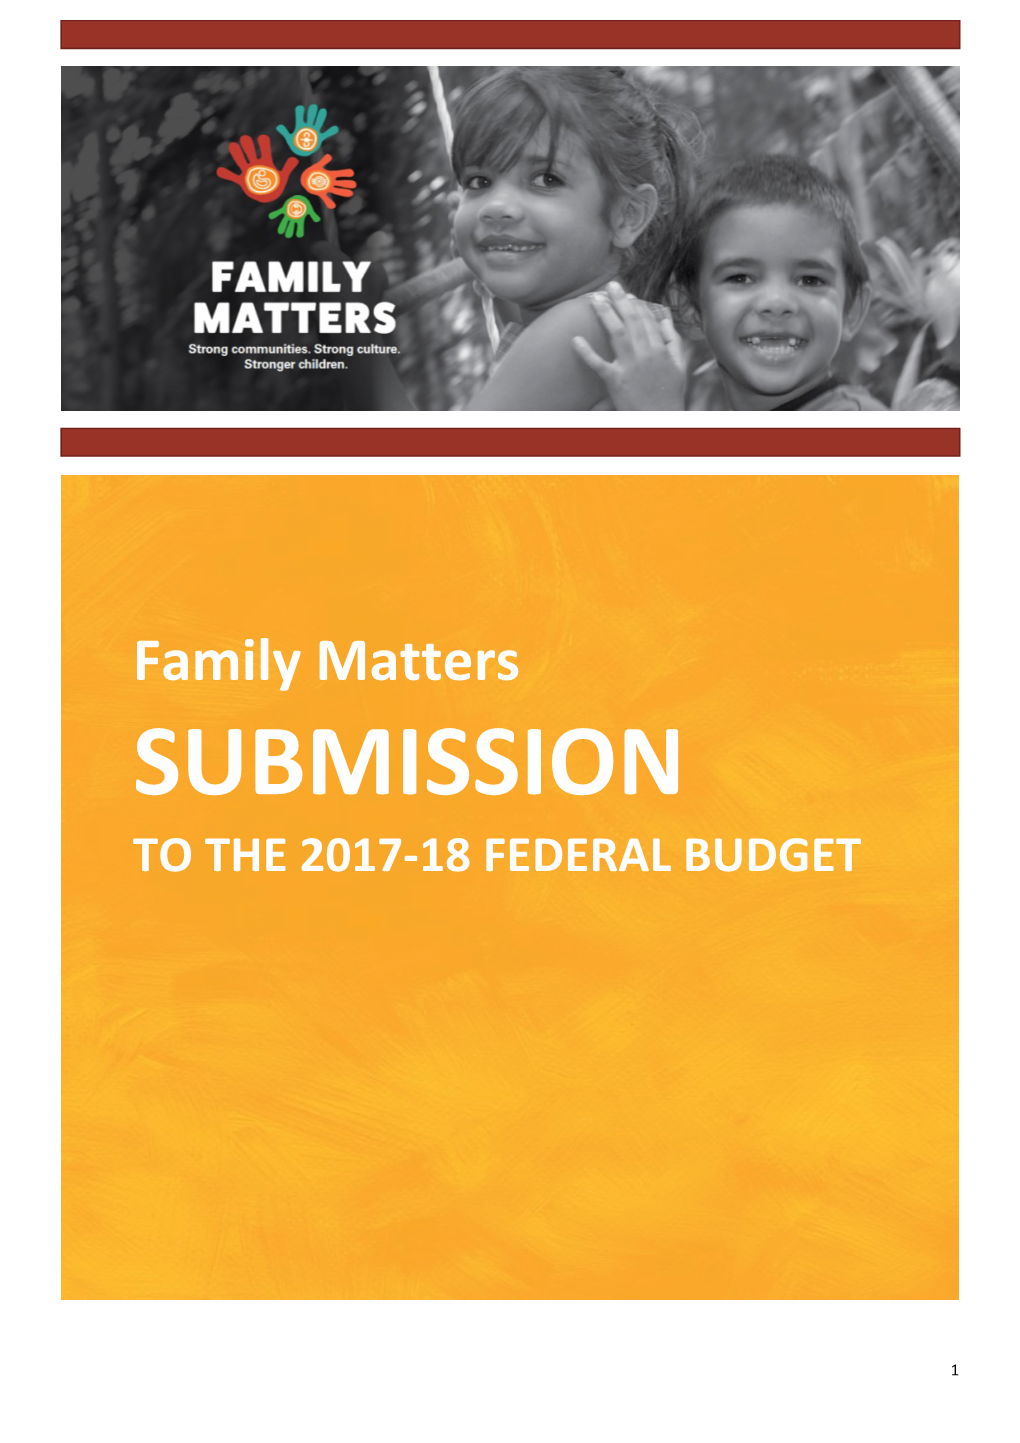 Family Matters Federal Budget Submission 2017-18